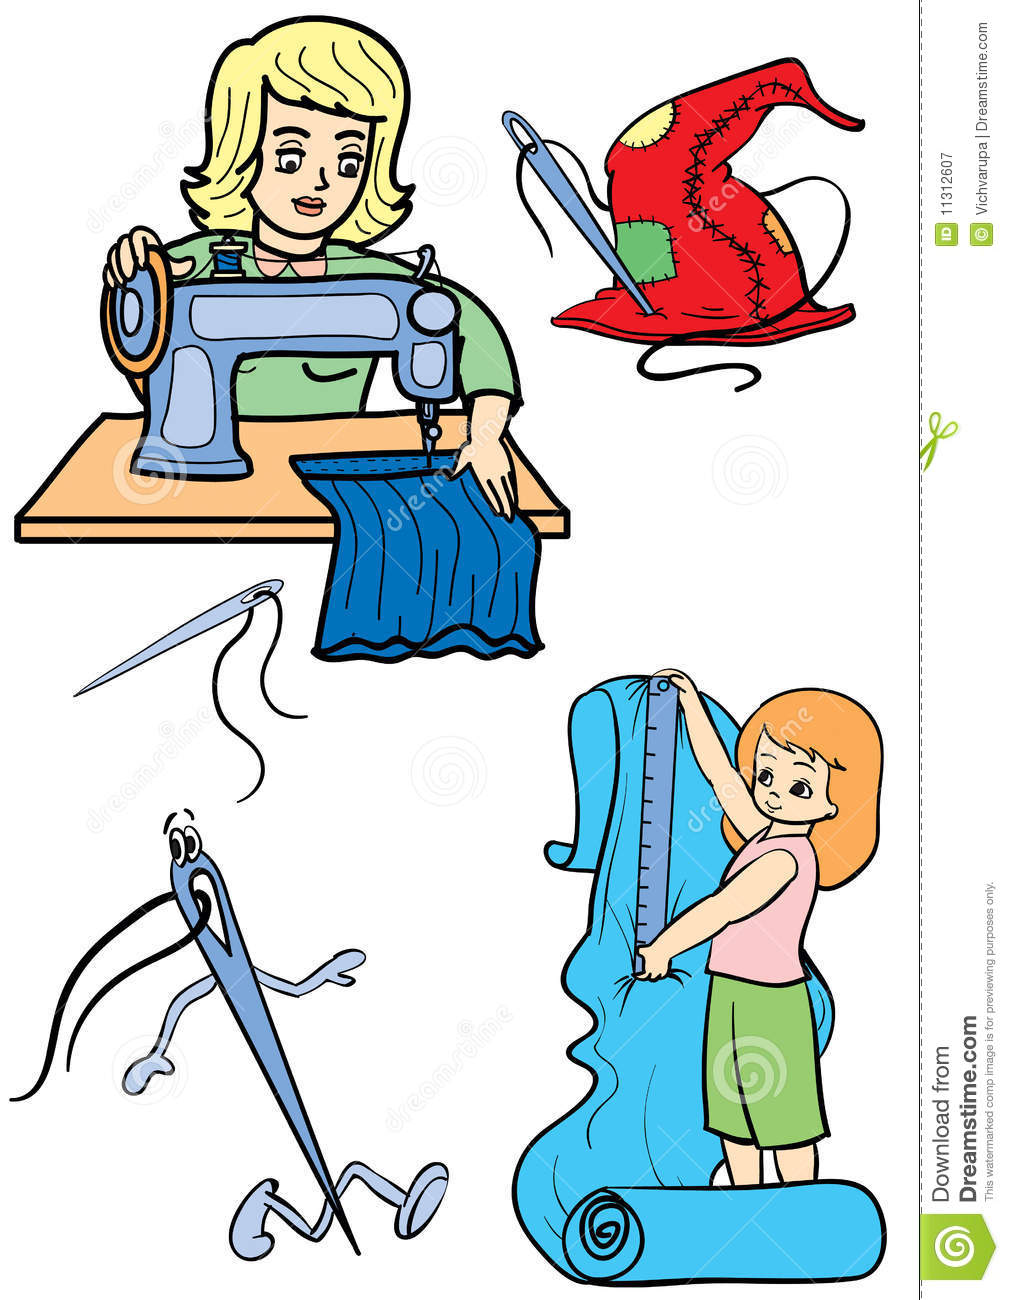 Sewing Royalty Free Stock Photography   Image  11312607